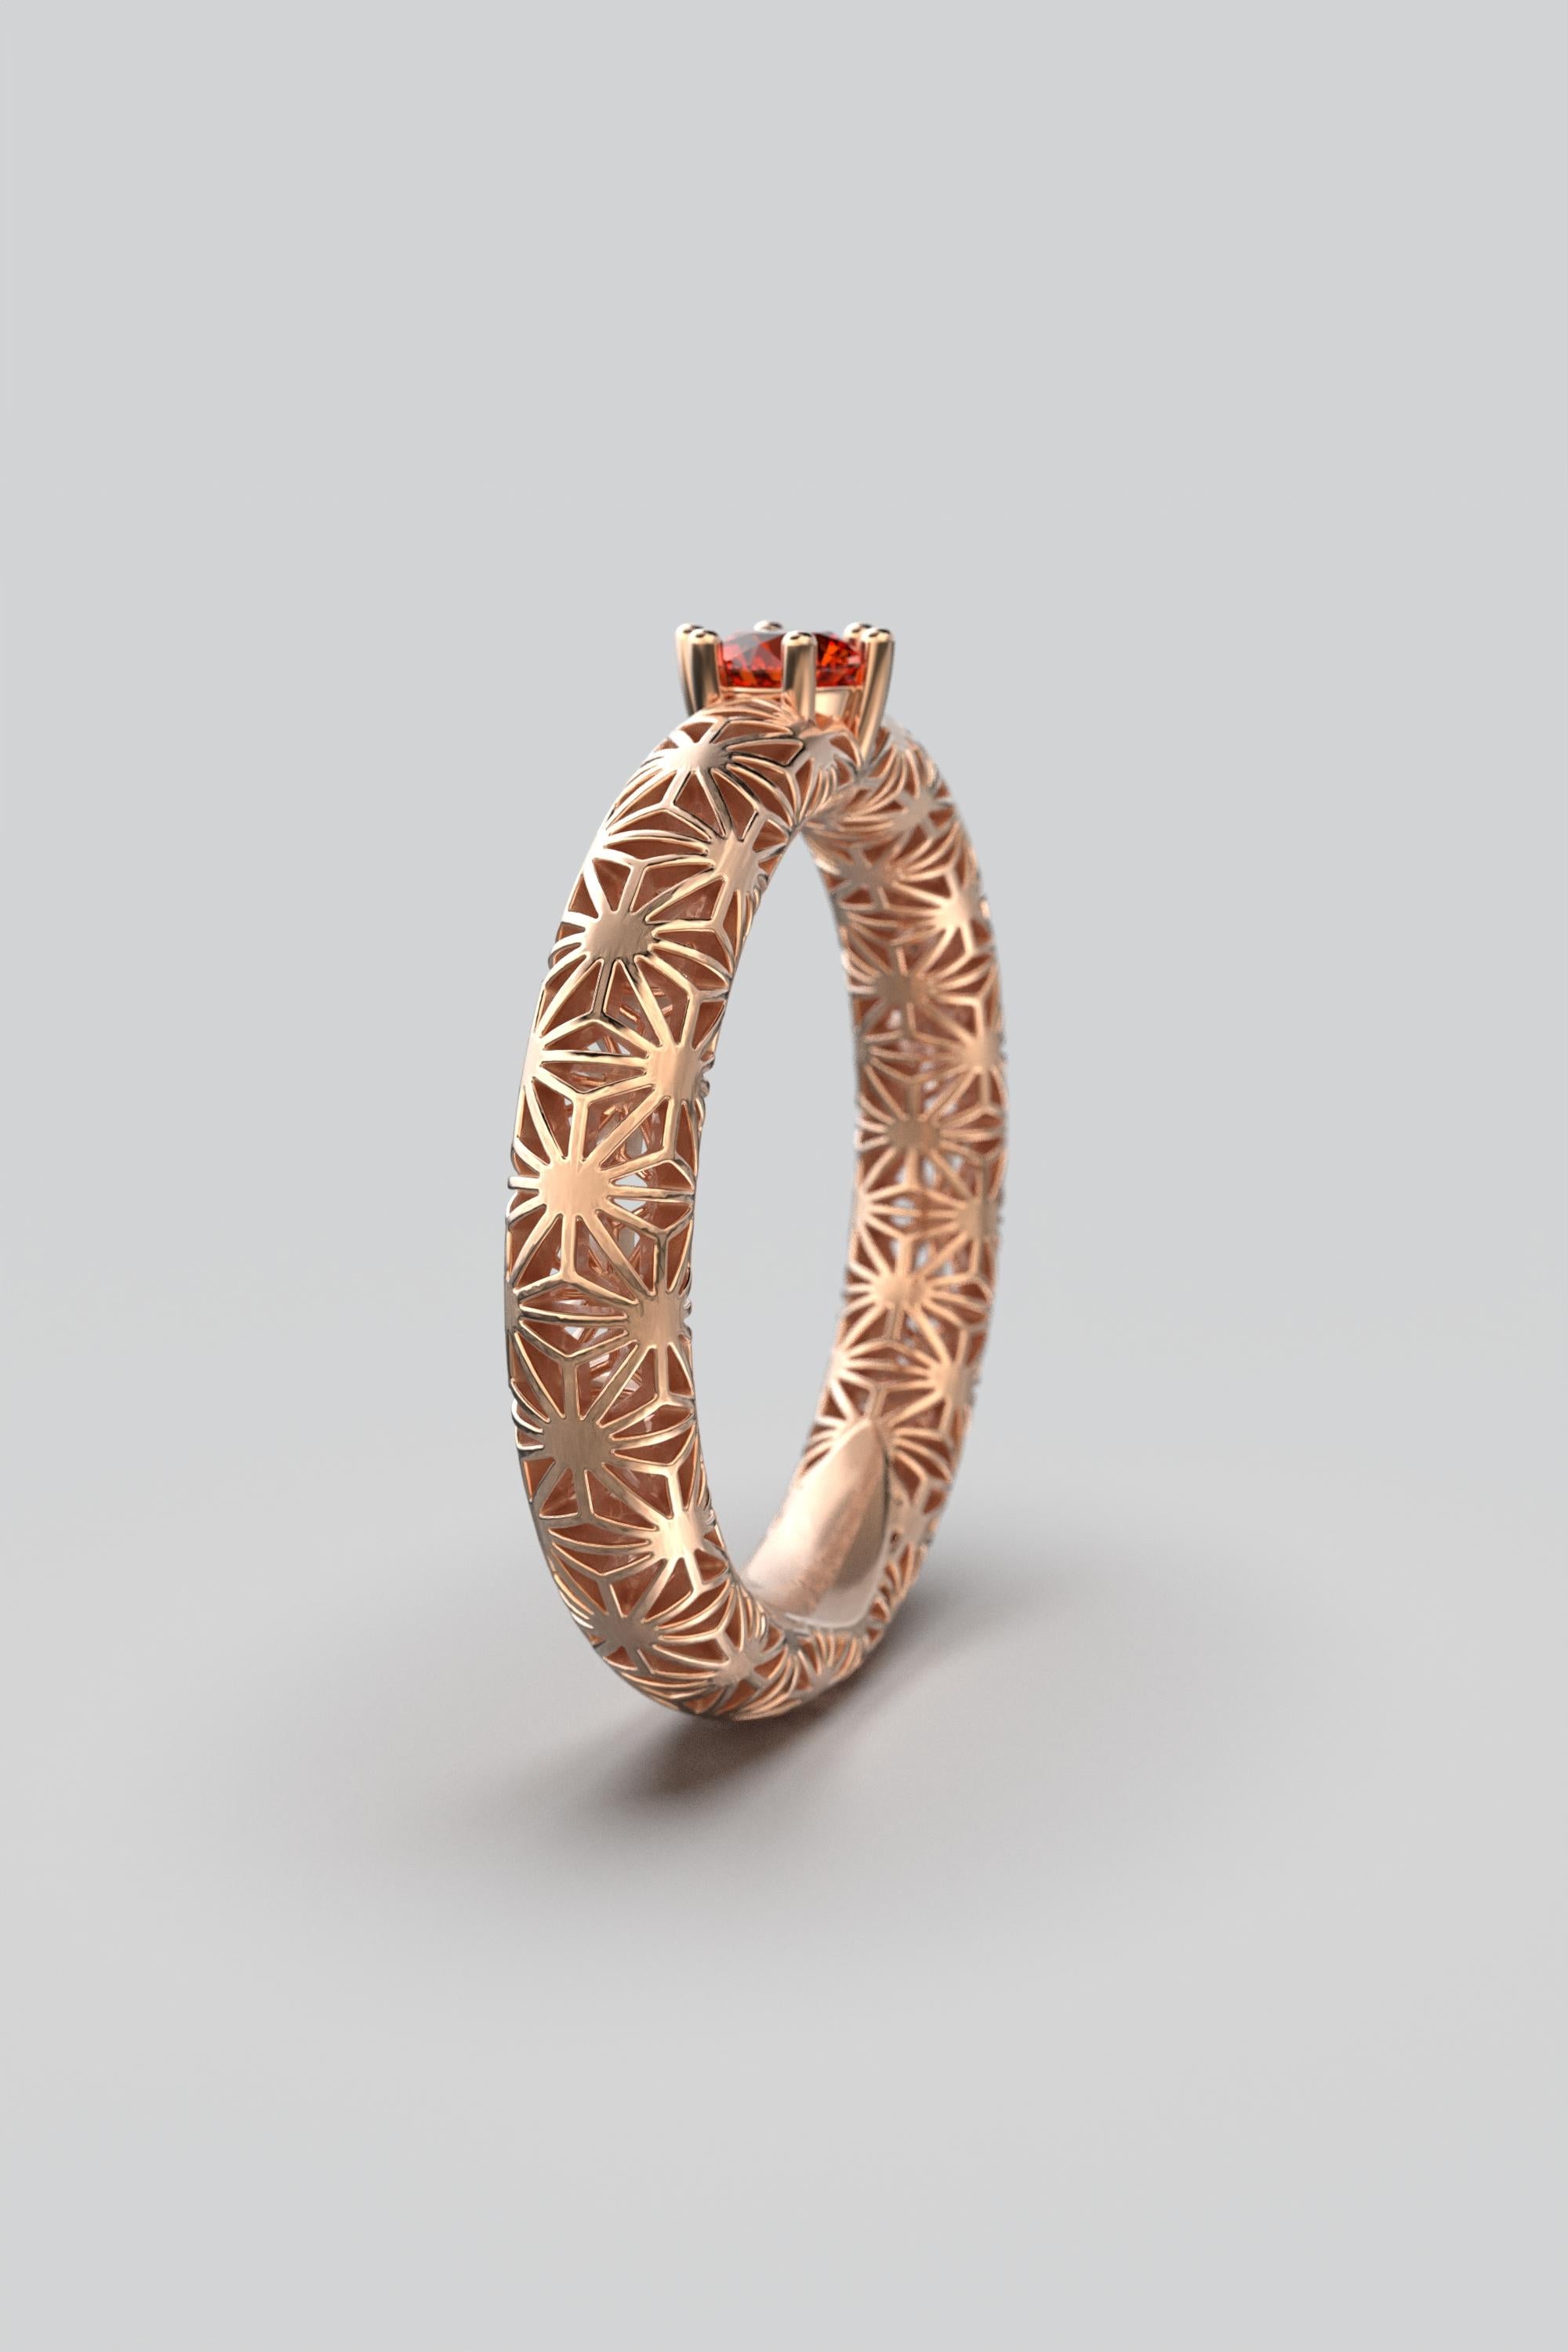 For Sale:  Orange Sapphire 18k Gold Band, Sashiko Pattern Gold Ring By Oltremare Gioielli 9